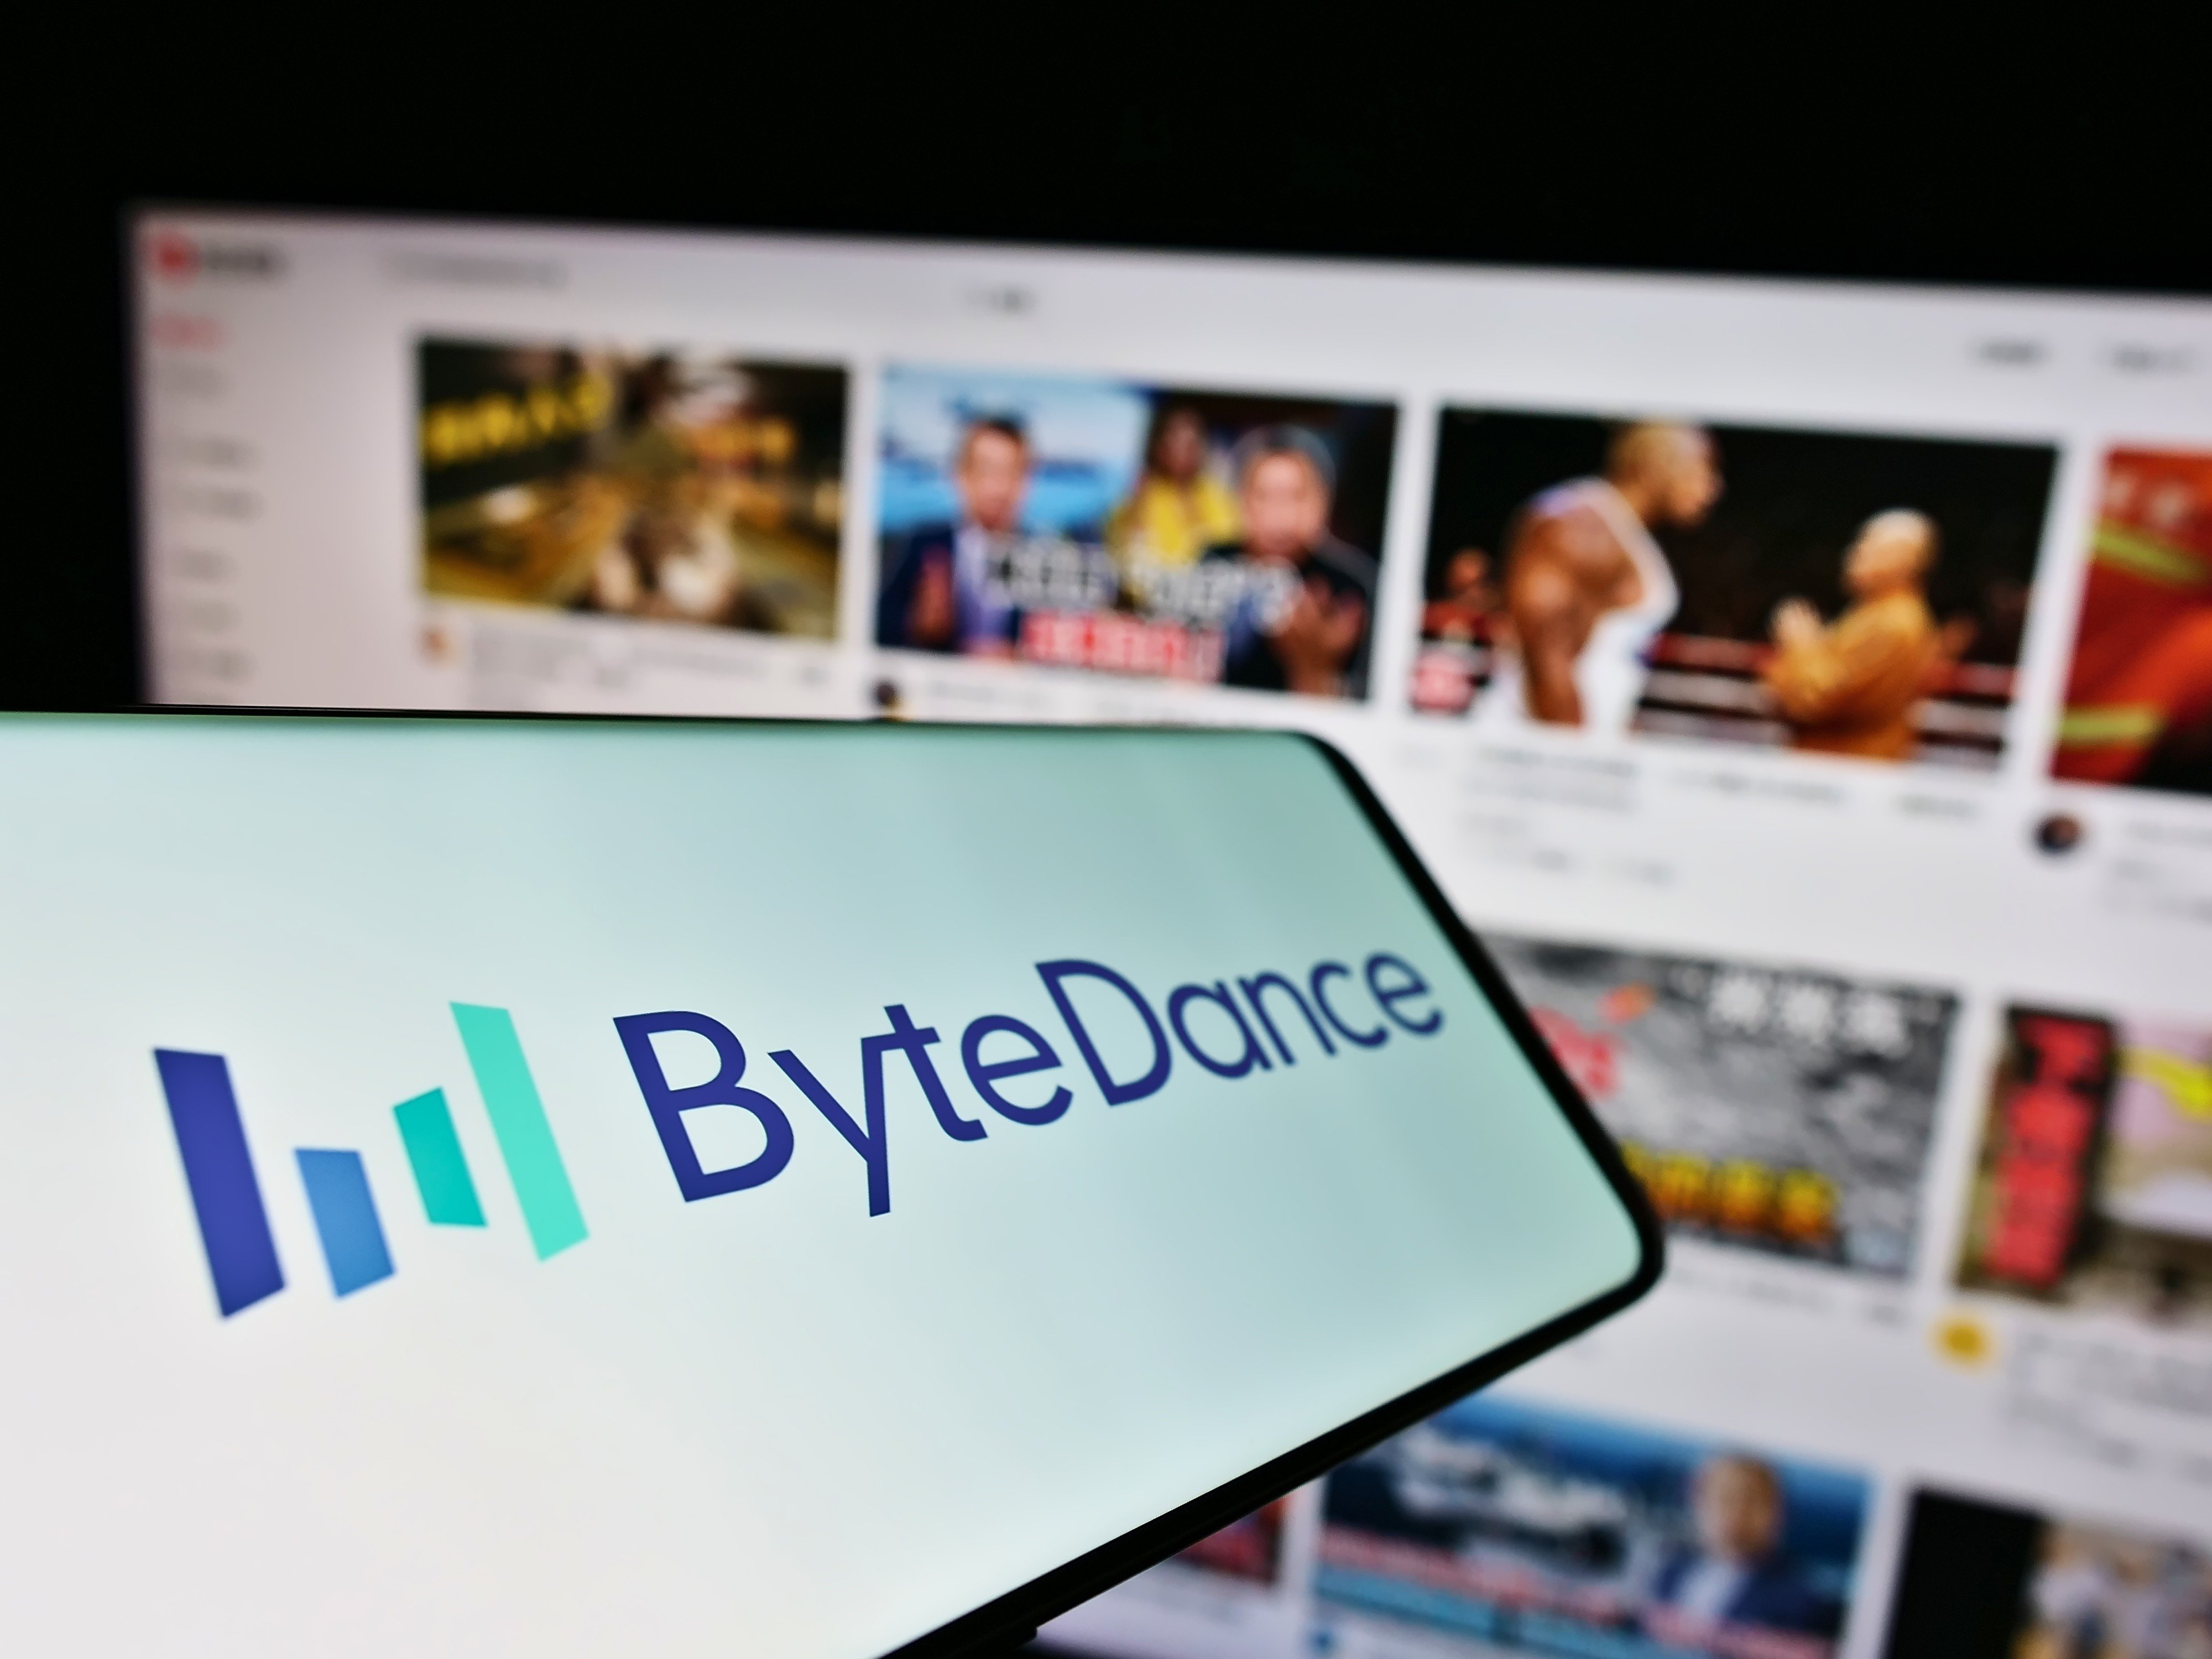 The increased bonus programme shows the lengths taken by ByteDance to retain and attract talent, even as the company continues to restructure its operations this year. Photo: Shutterstock